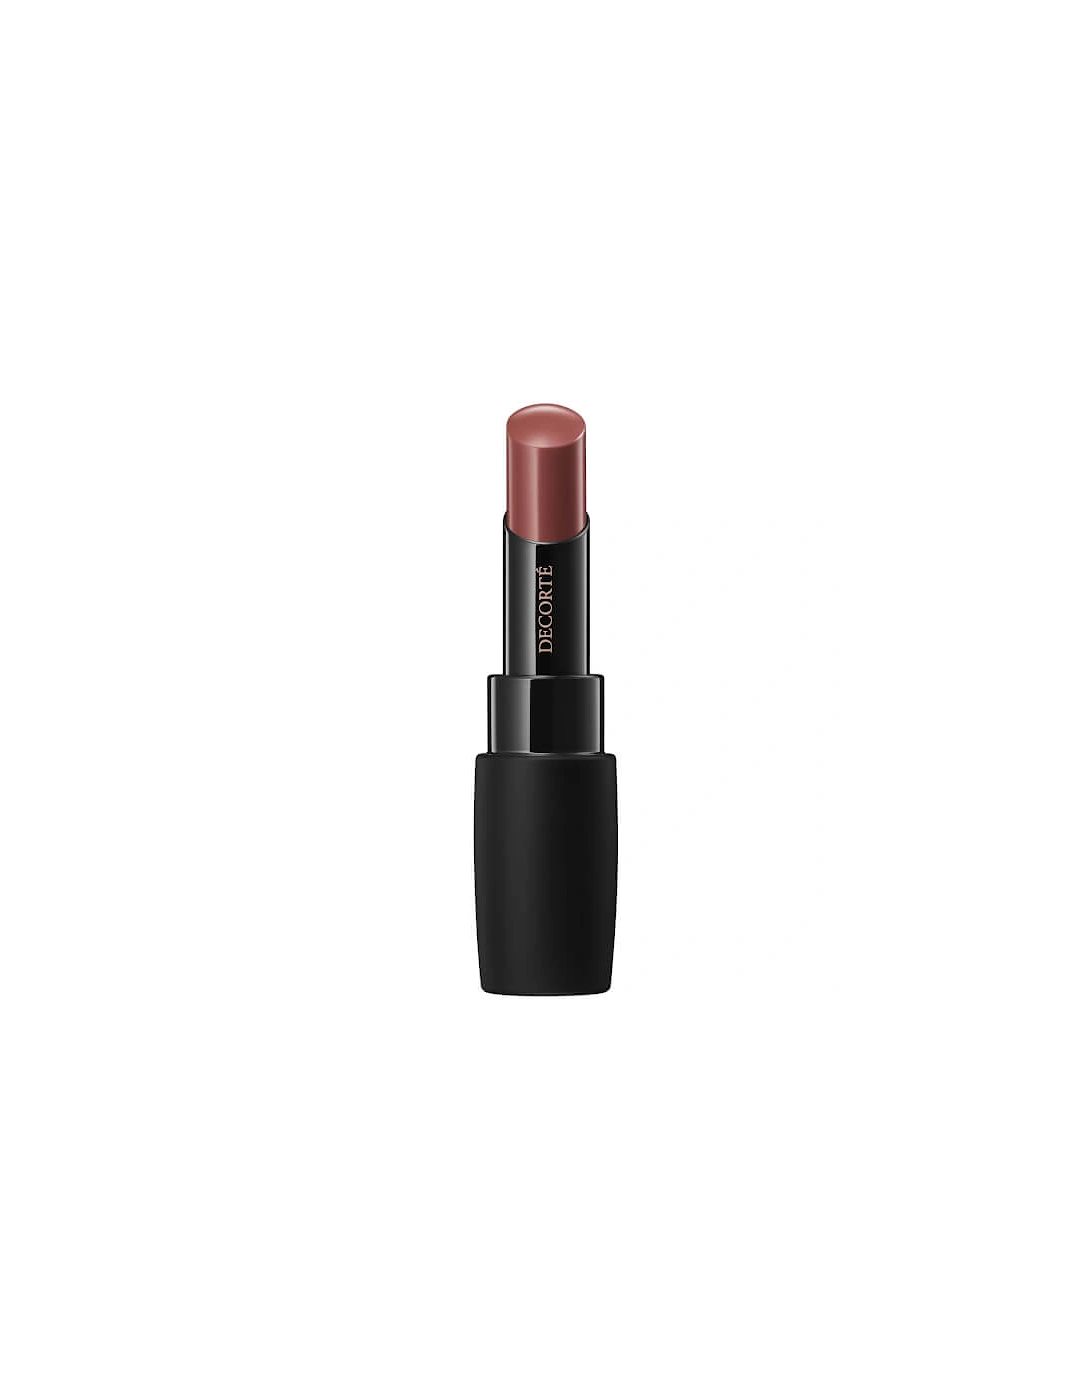 The Rouge High Gloss Lipstick - SP050